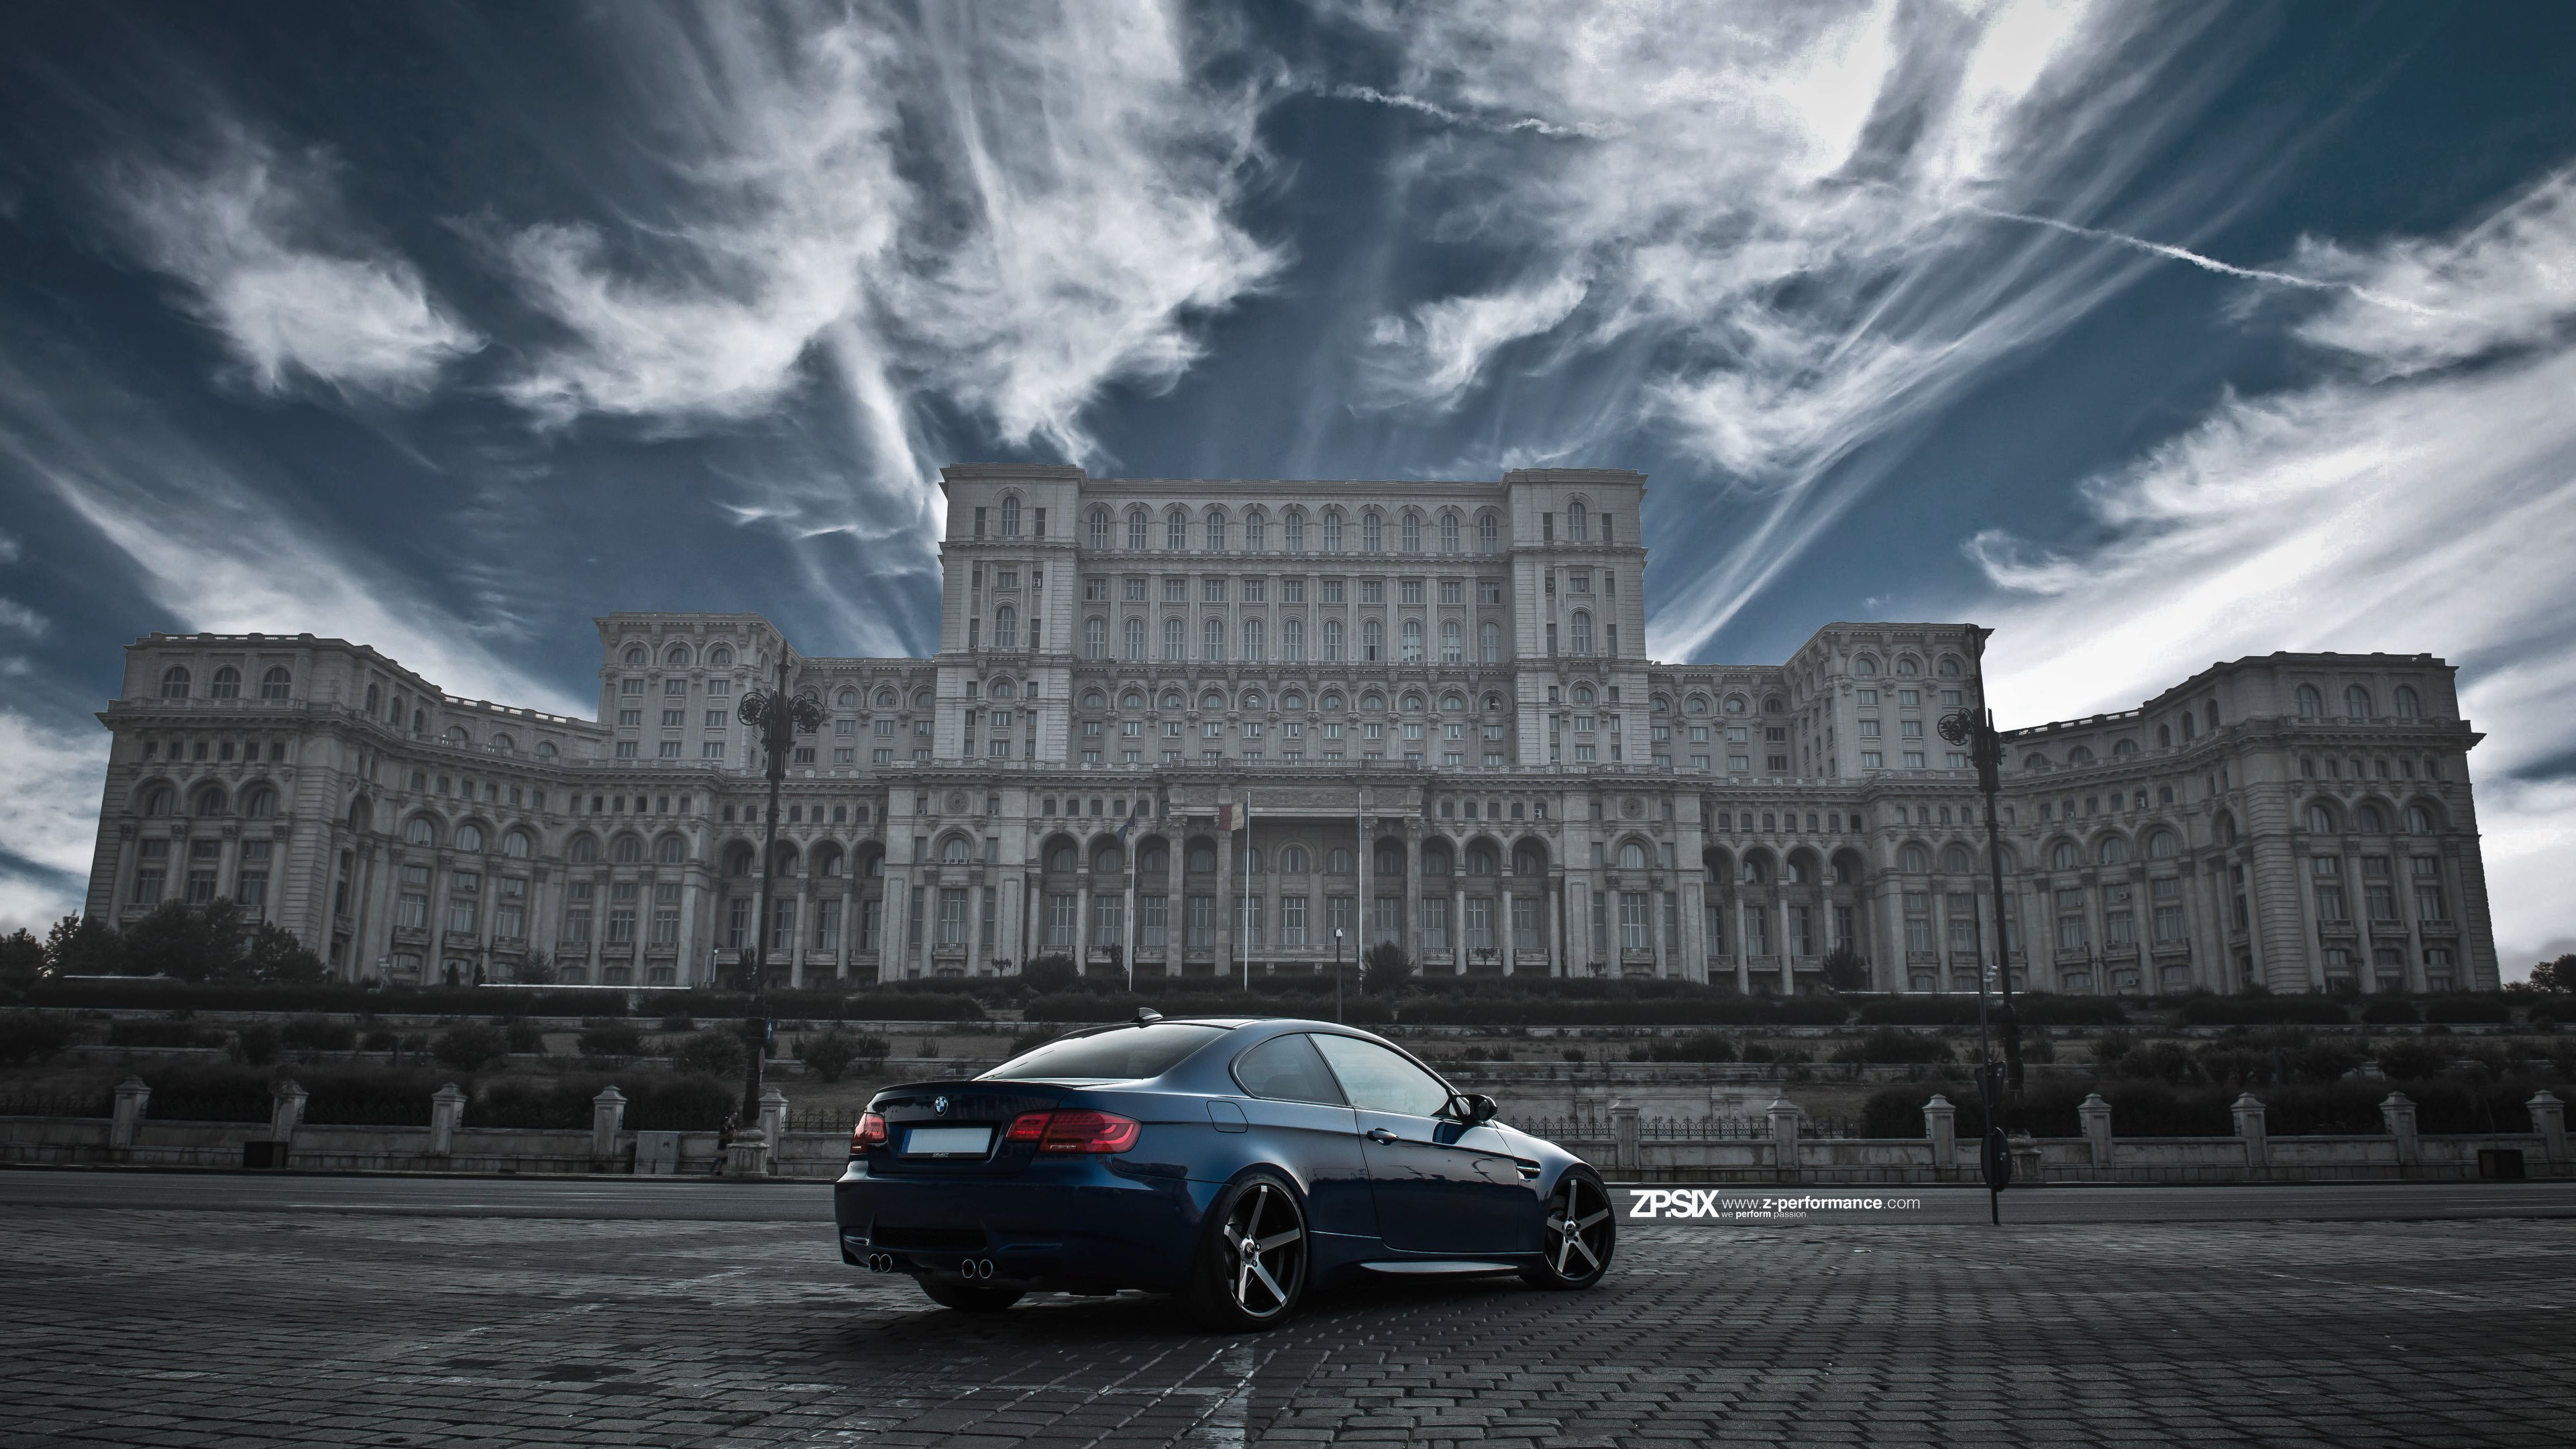 BMW 7 Series HD Wallpapers. 4K Backgrounds